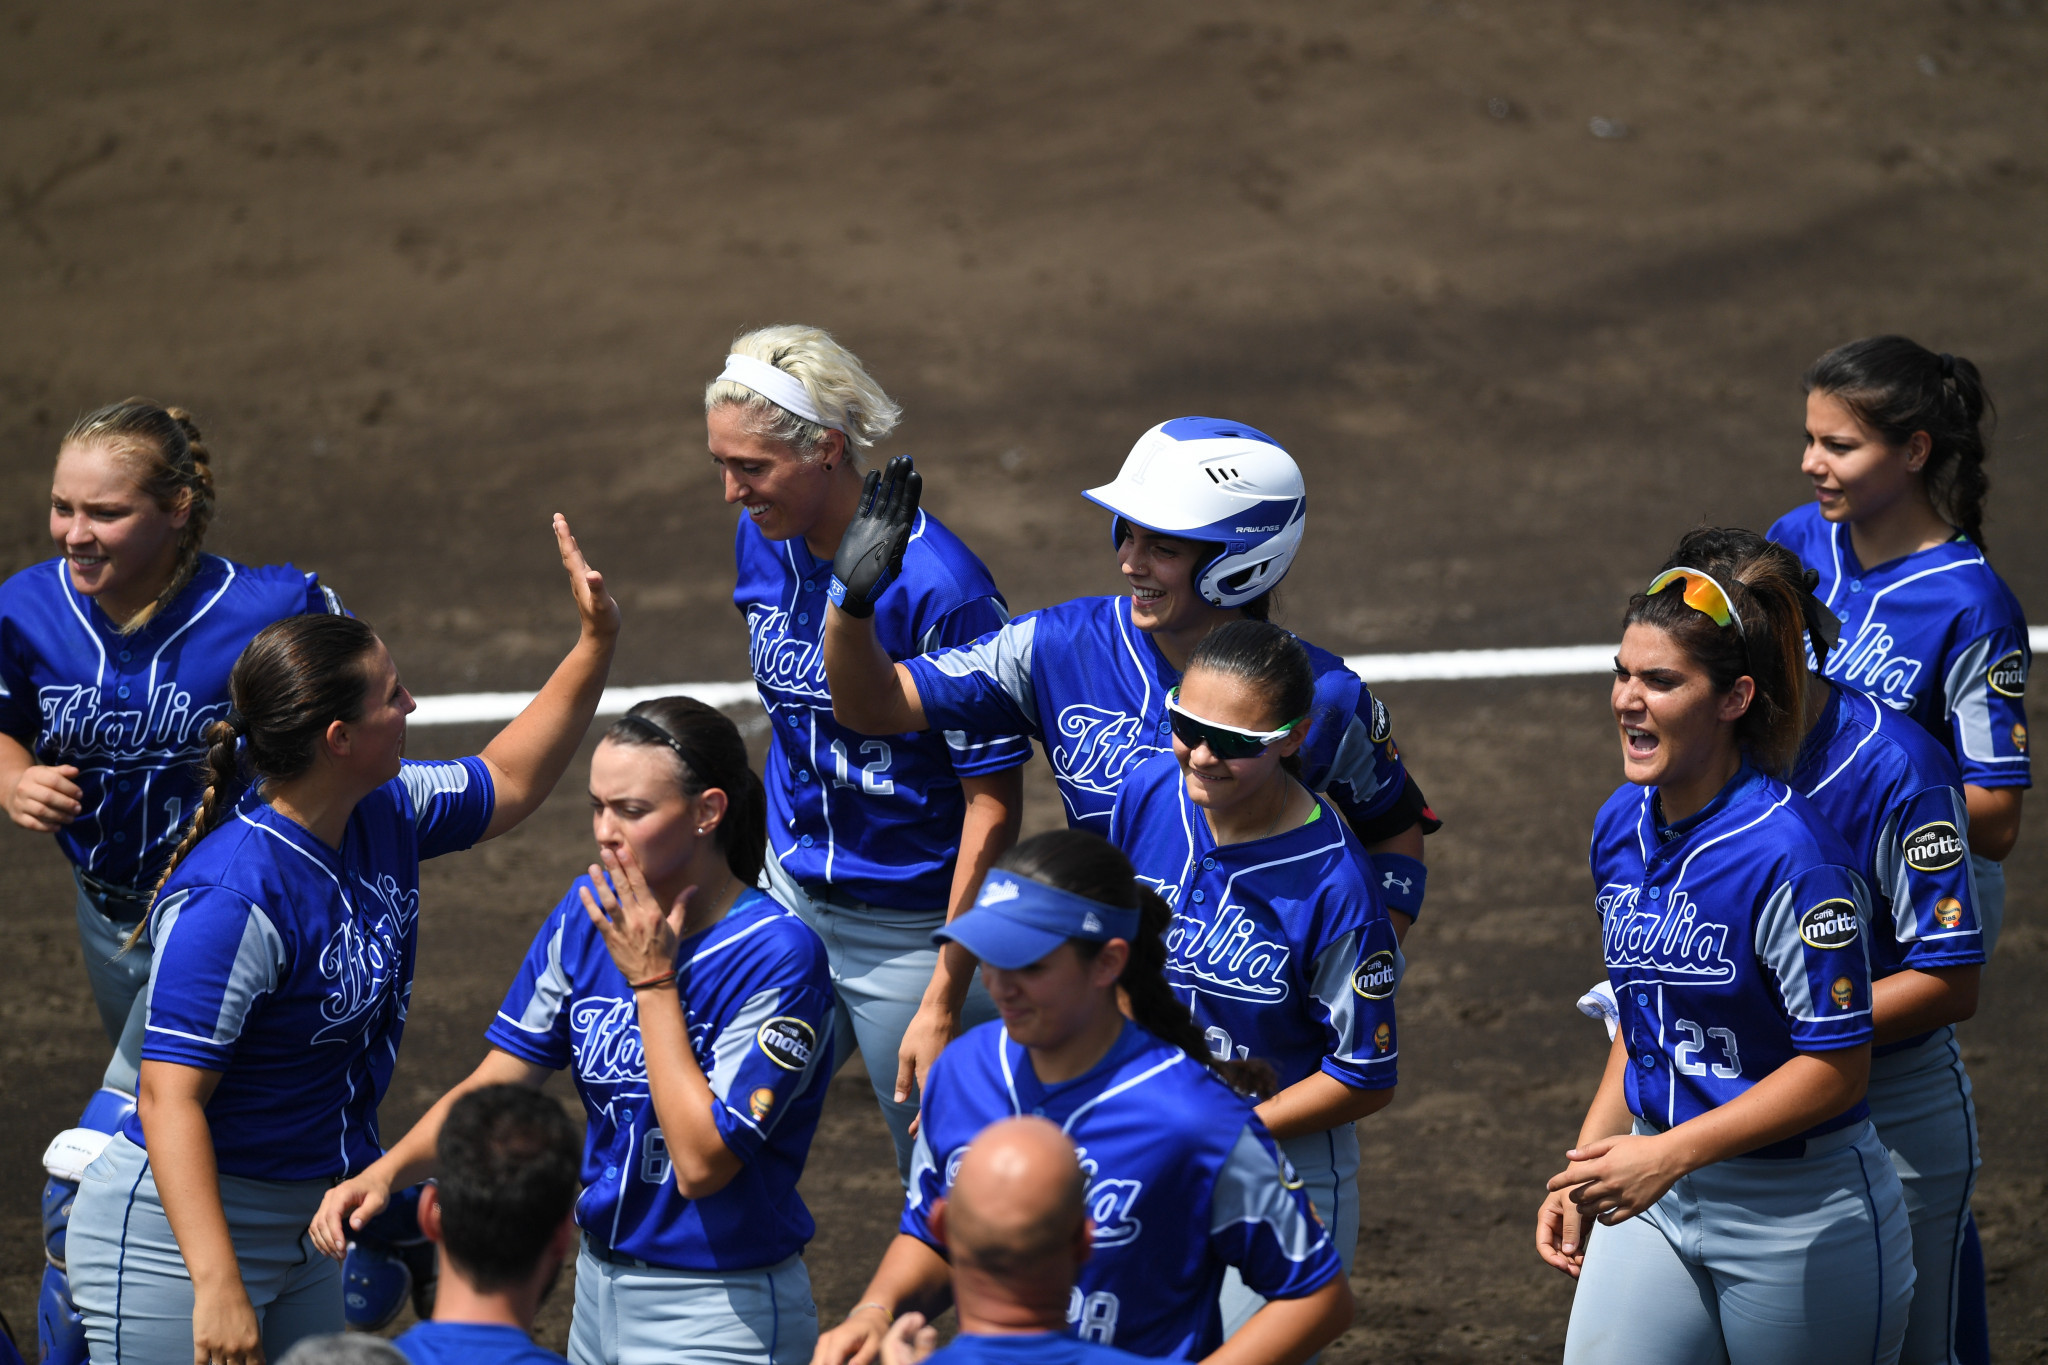 Pizzolini to lead Italian softball team at Tokyo 2020 after head coach death